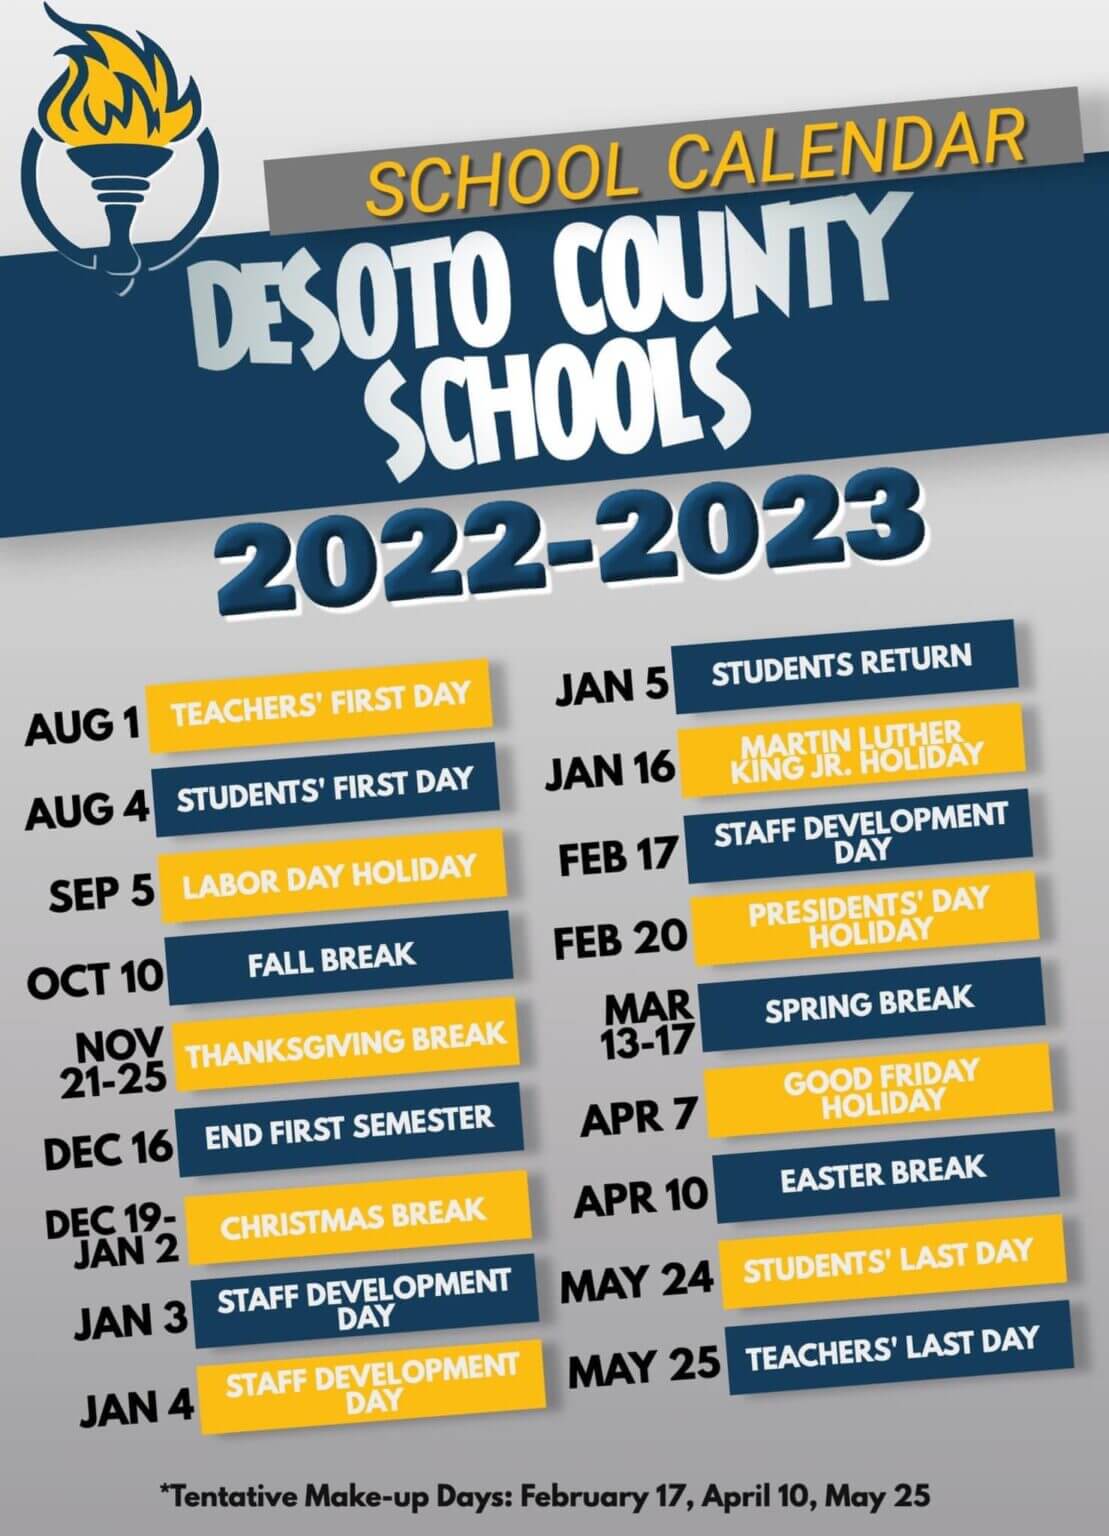 School calendar approved for 2022-23